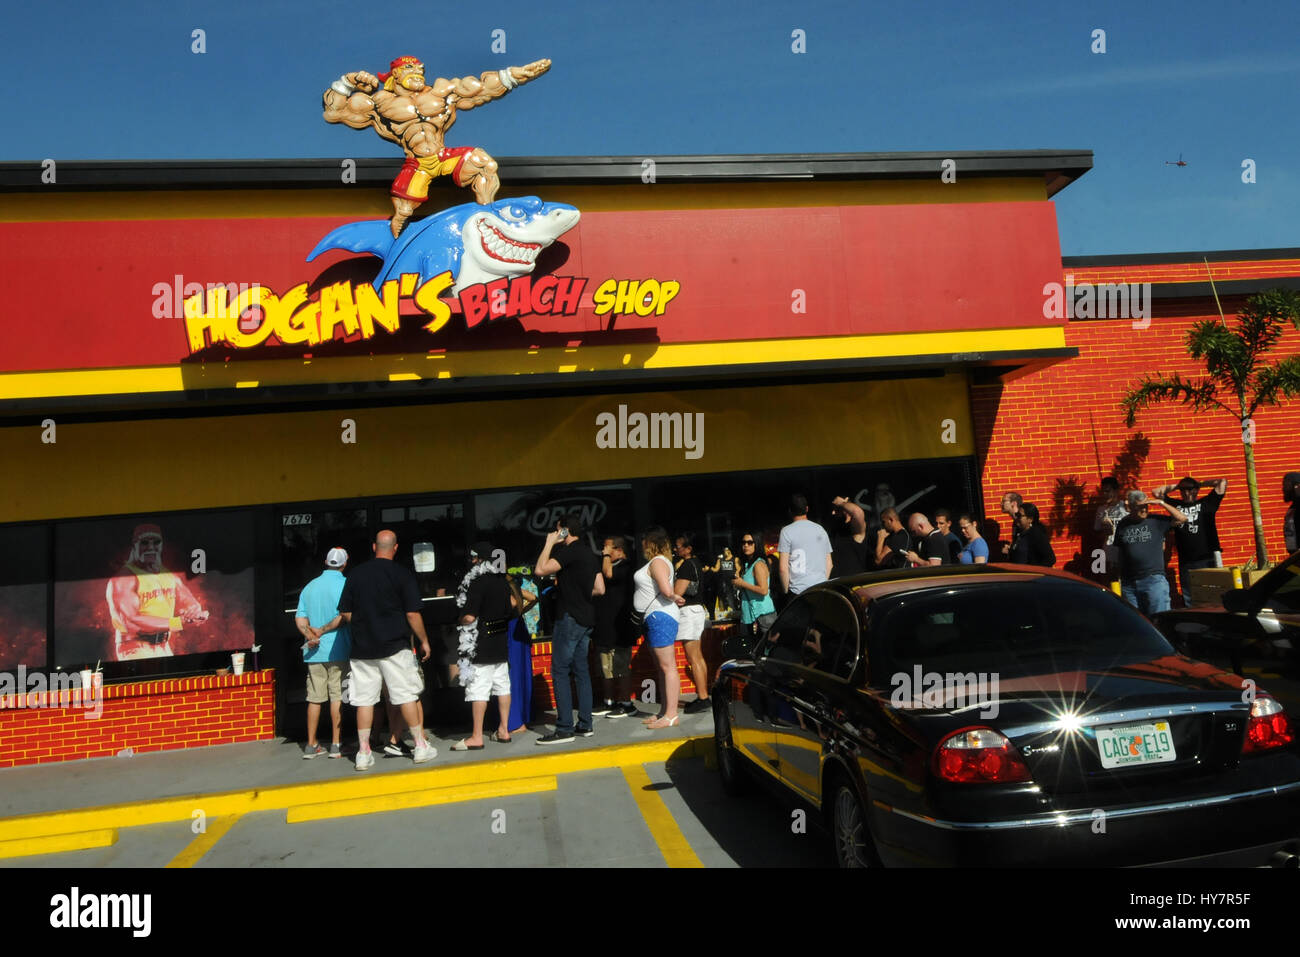 Orlando, Florida, USA. 1st April, 2017. People wait in line for autographs and photos with semi-retired professional wrestler Terry Gene Bollea, better known by his ring name Hulk Hogan, outside Hogan's Beach Shop, his retail merchandise store which opened on March 30, 2017 in Orlando, Florida. Credit: Paul Hennessy/Alamy Live News Stock Photo